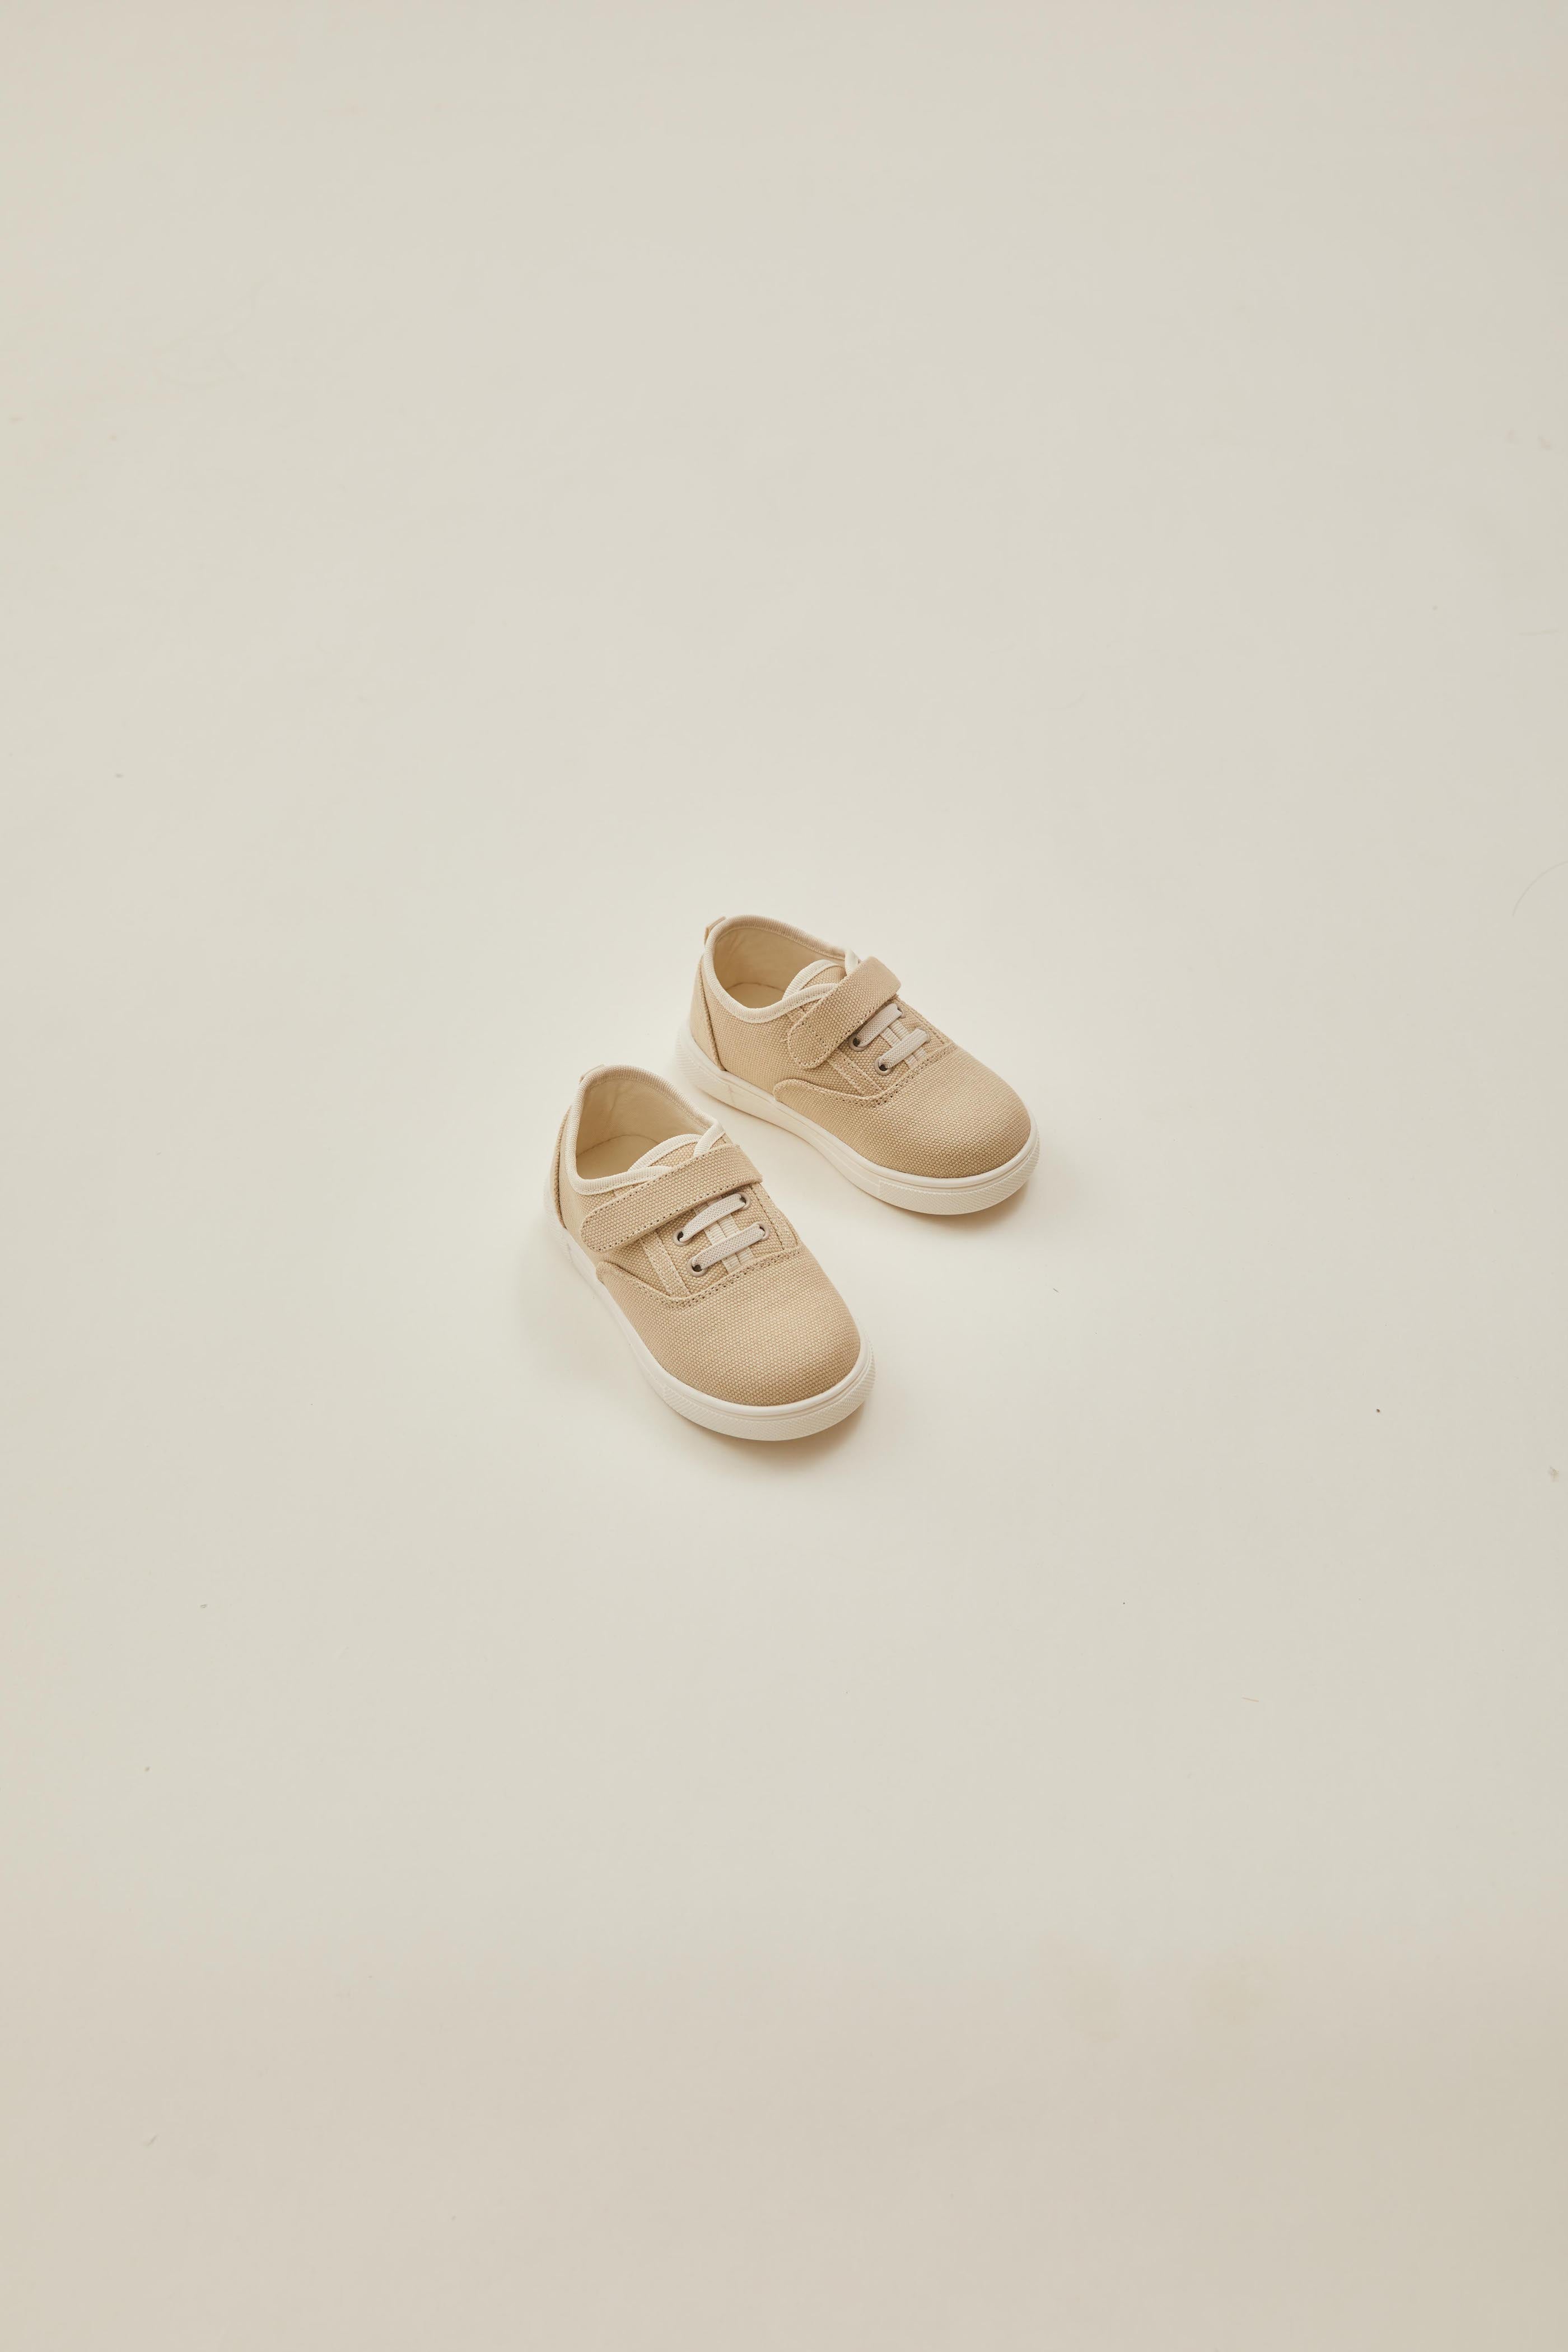 Mini Cohen Shoes in Sand